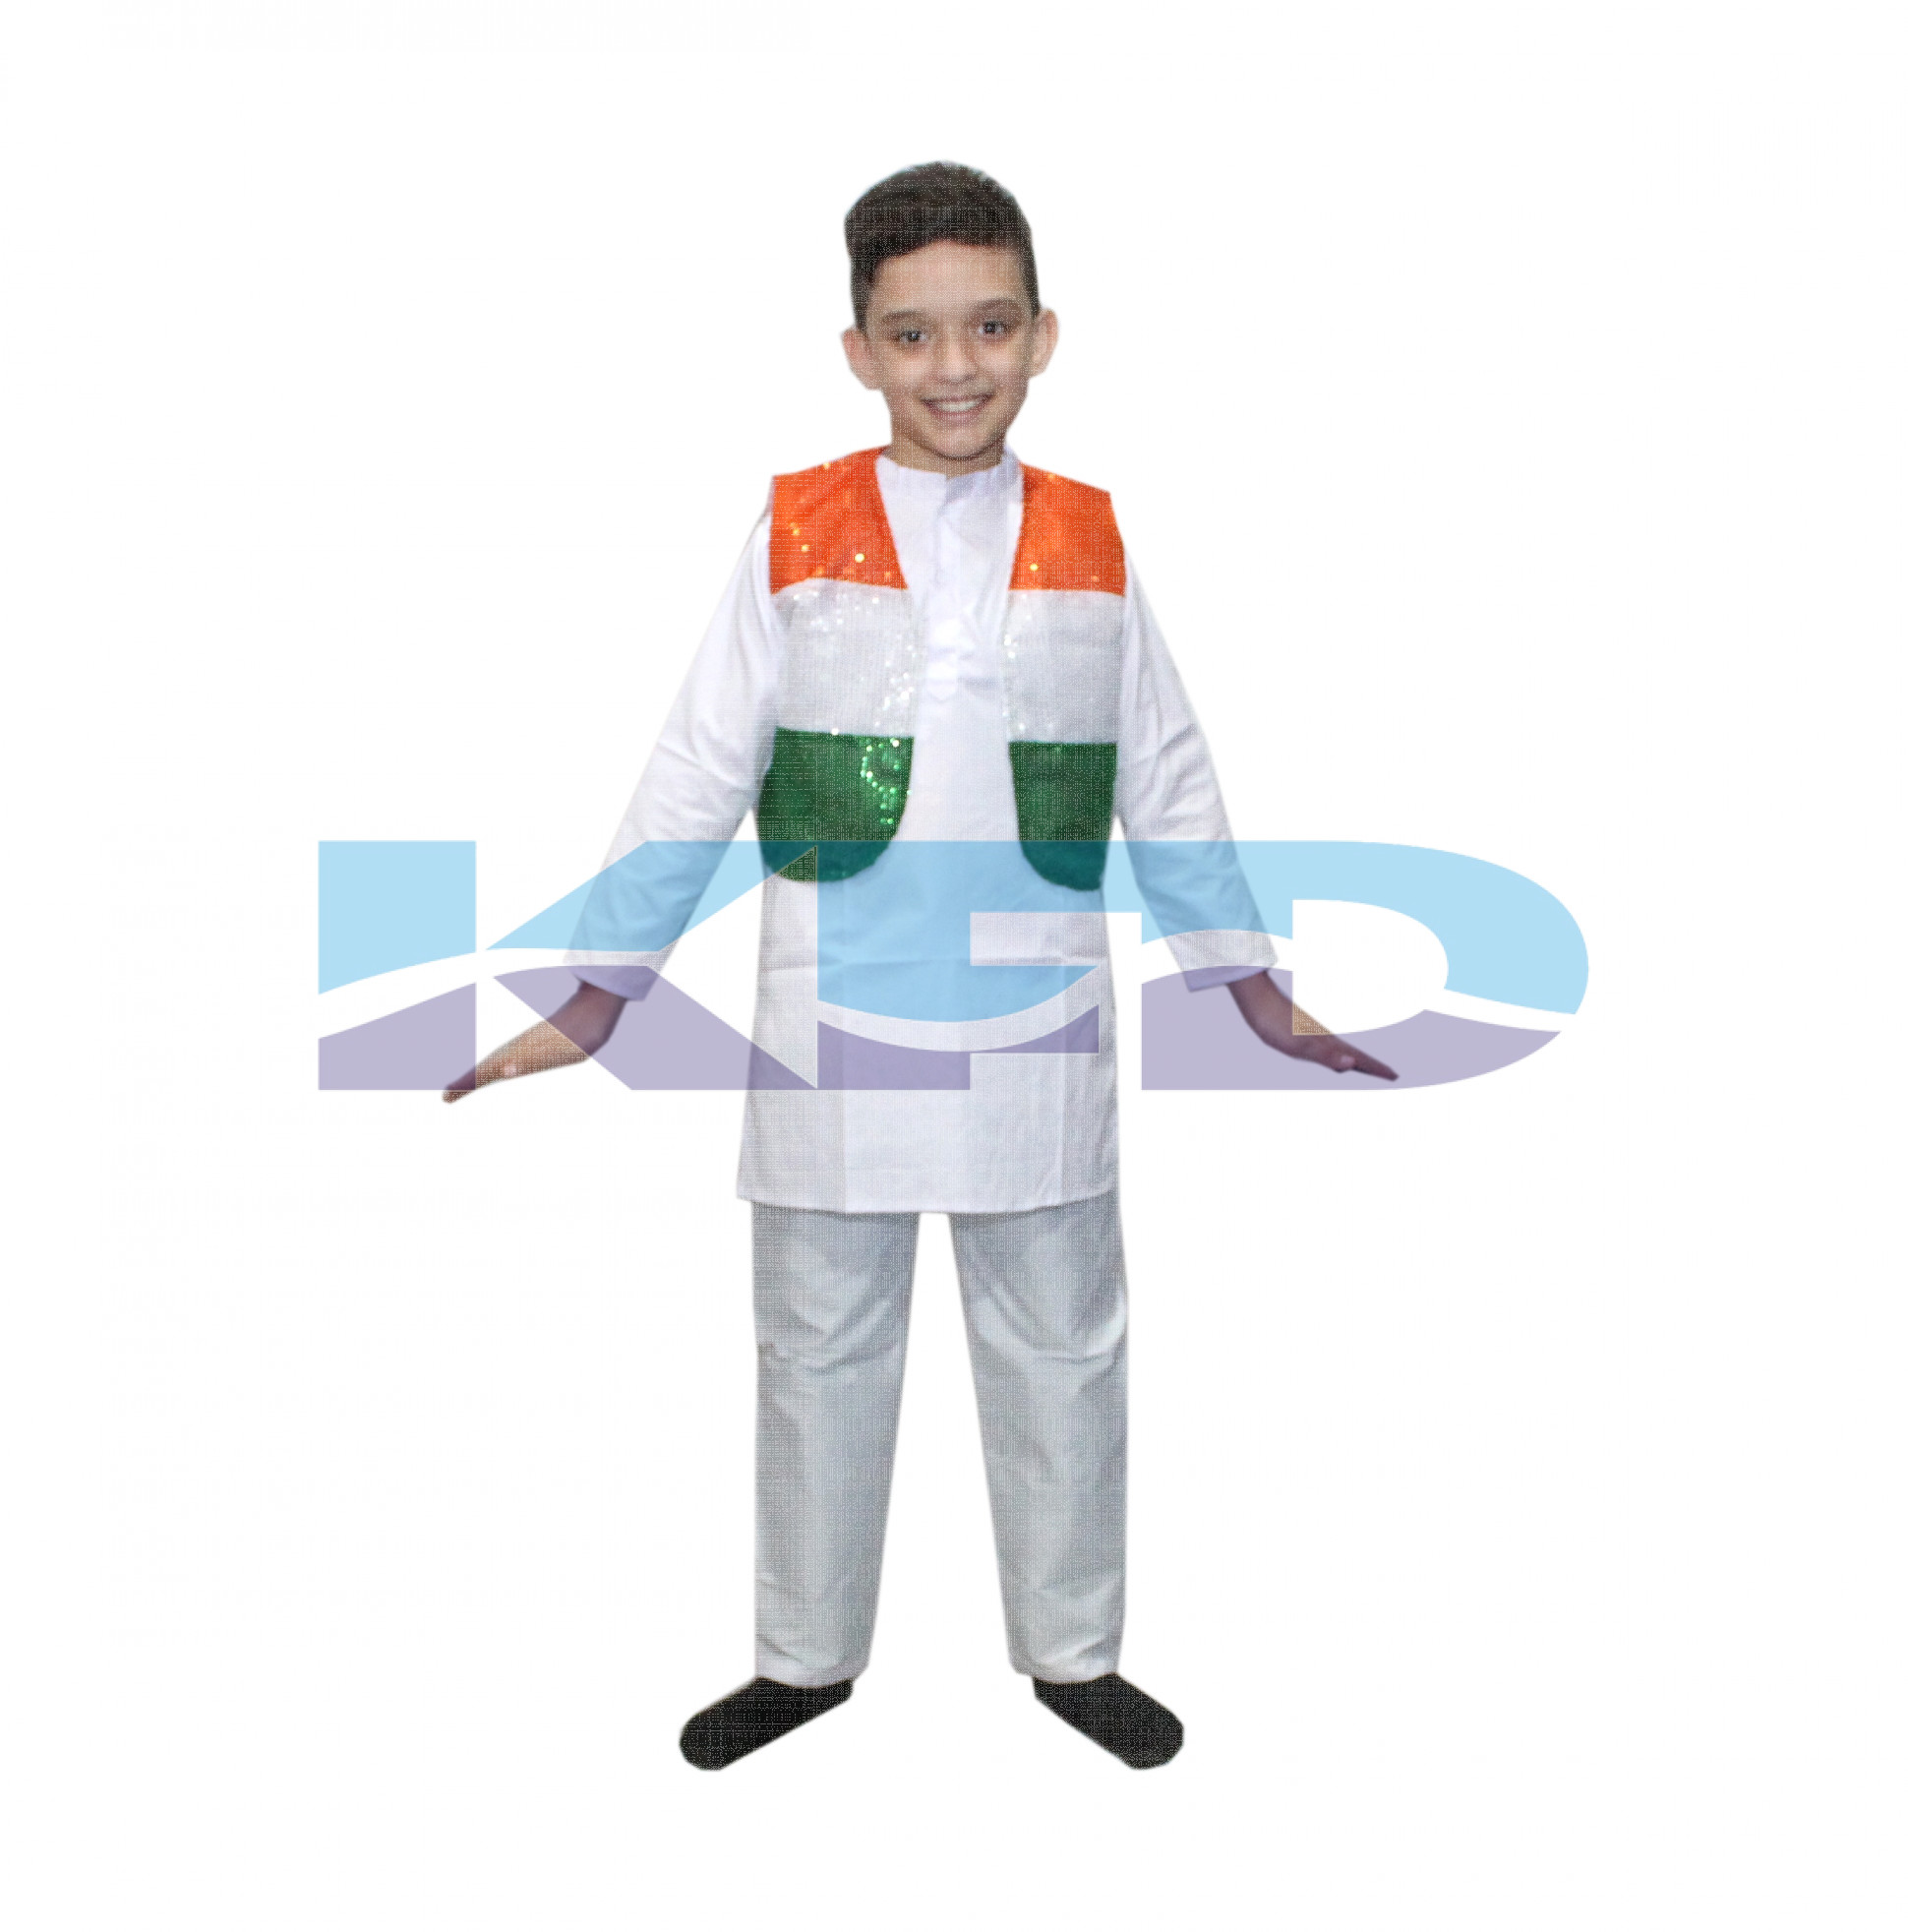 Tri Color Jacket Costume For Kids Independence Day/Republic Day/School Annual function/Theme Party/Competition/Stage Shows/Birthday Party Dress